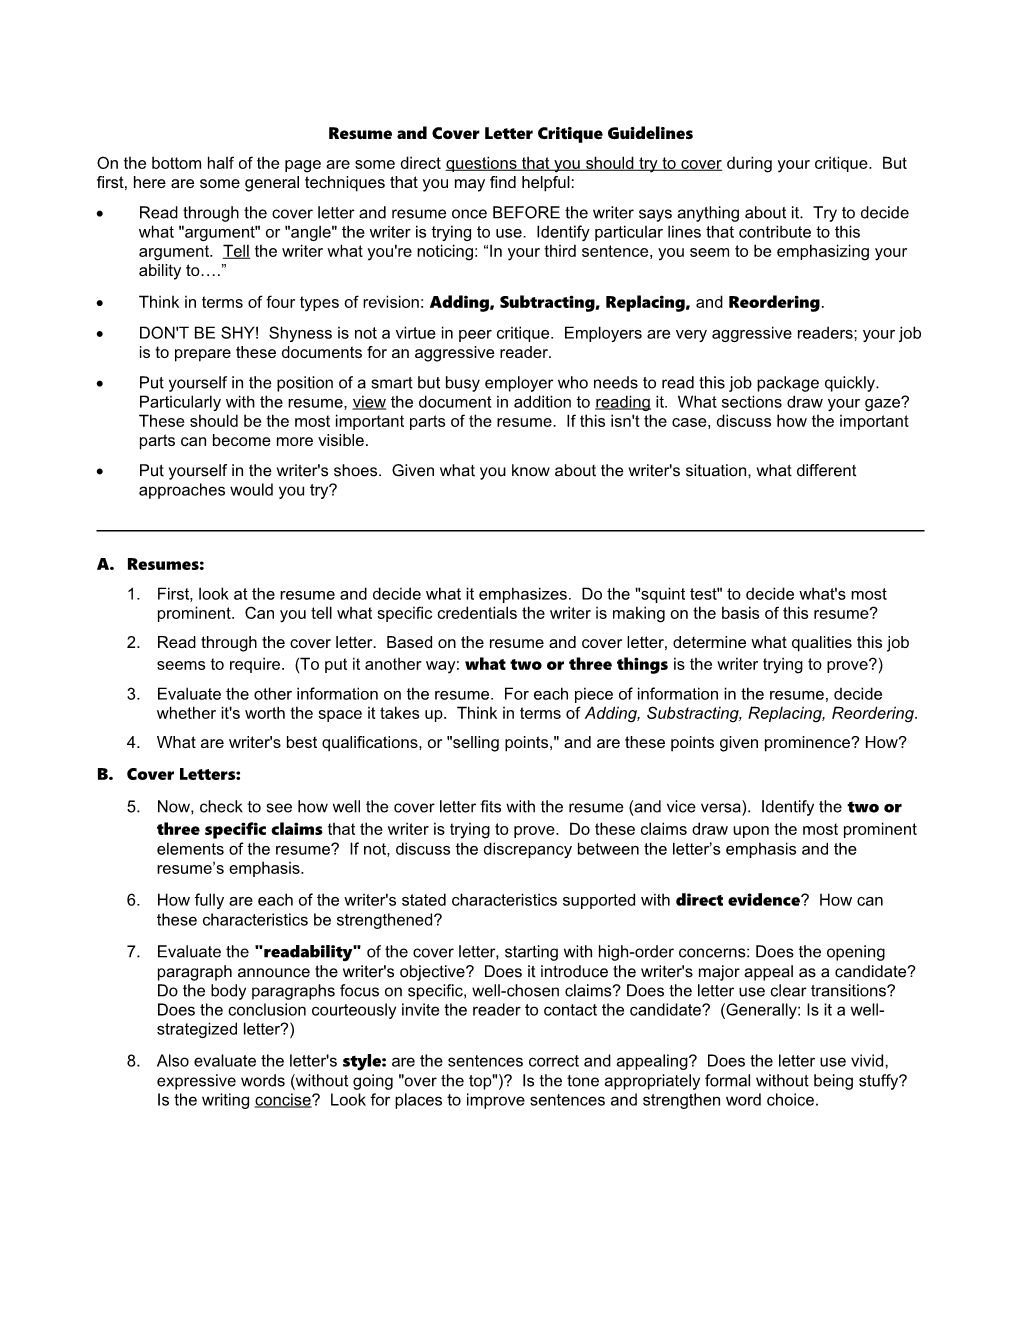 Resume and Cover Letter Critique Guidelines